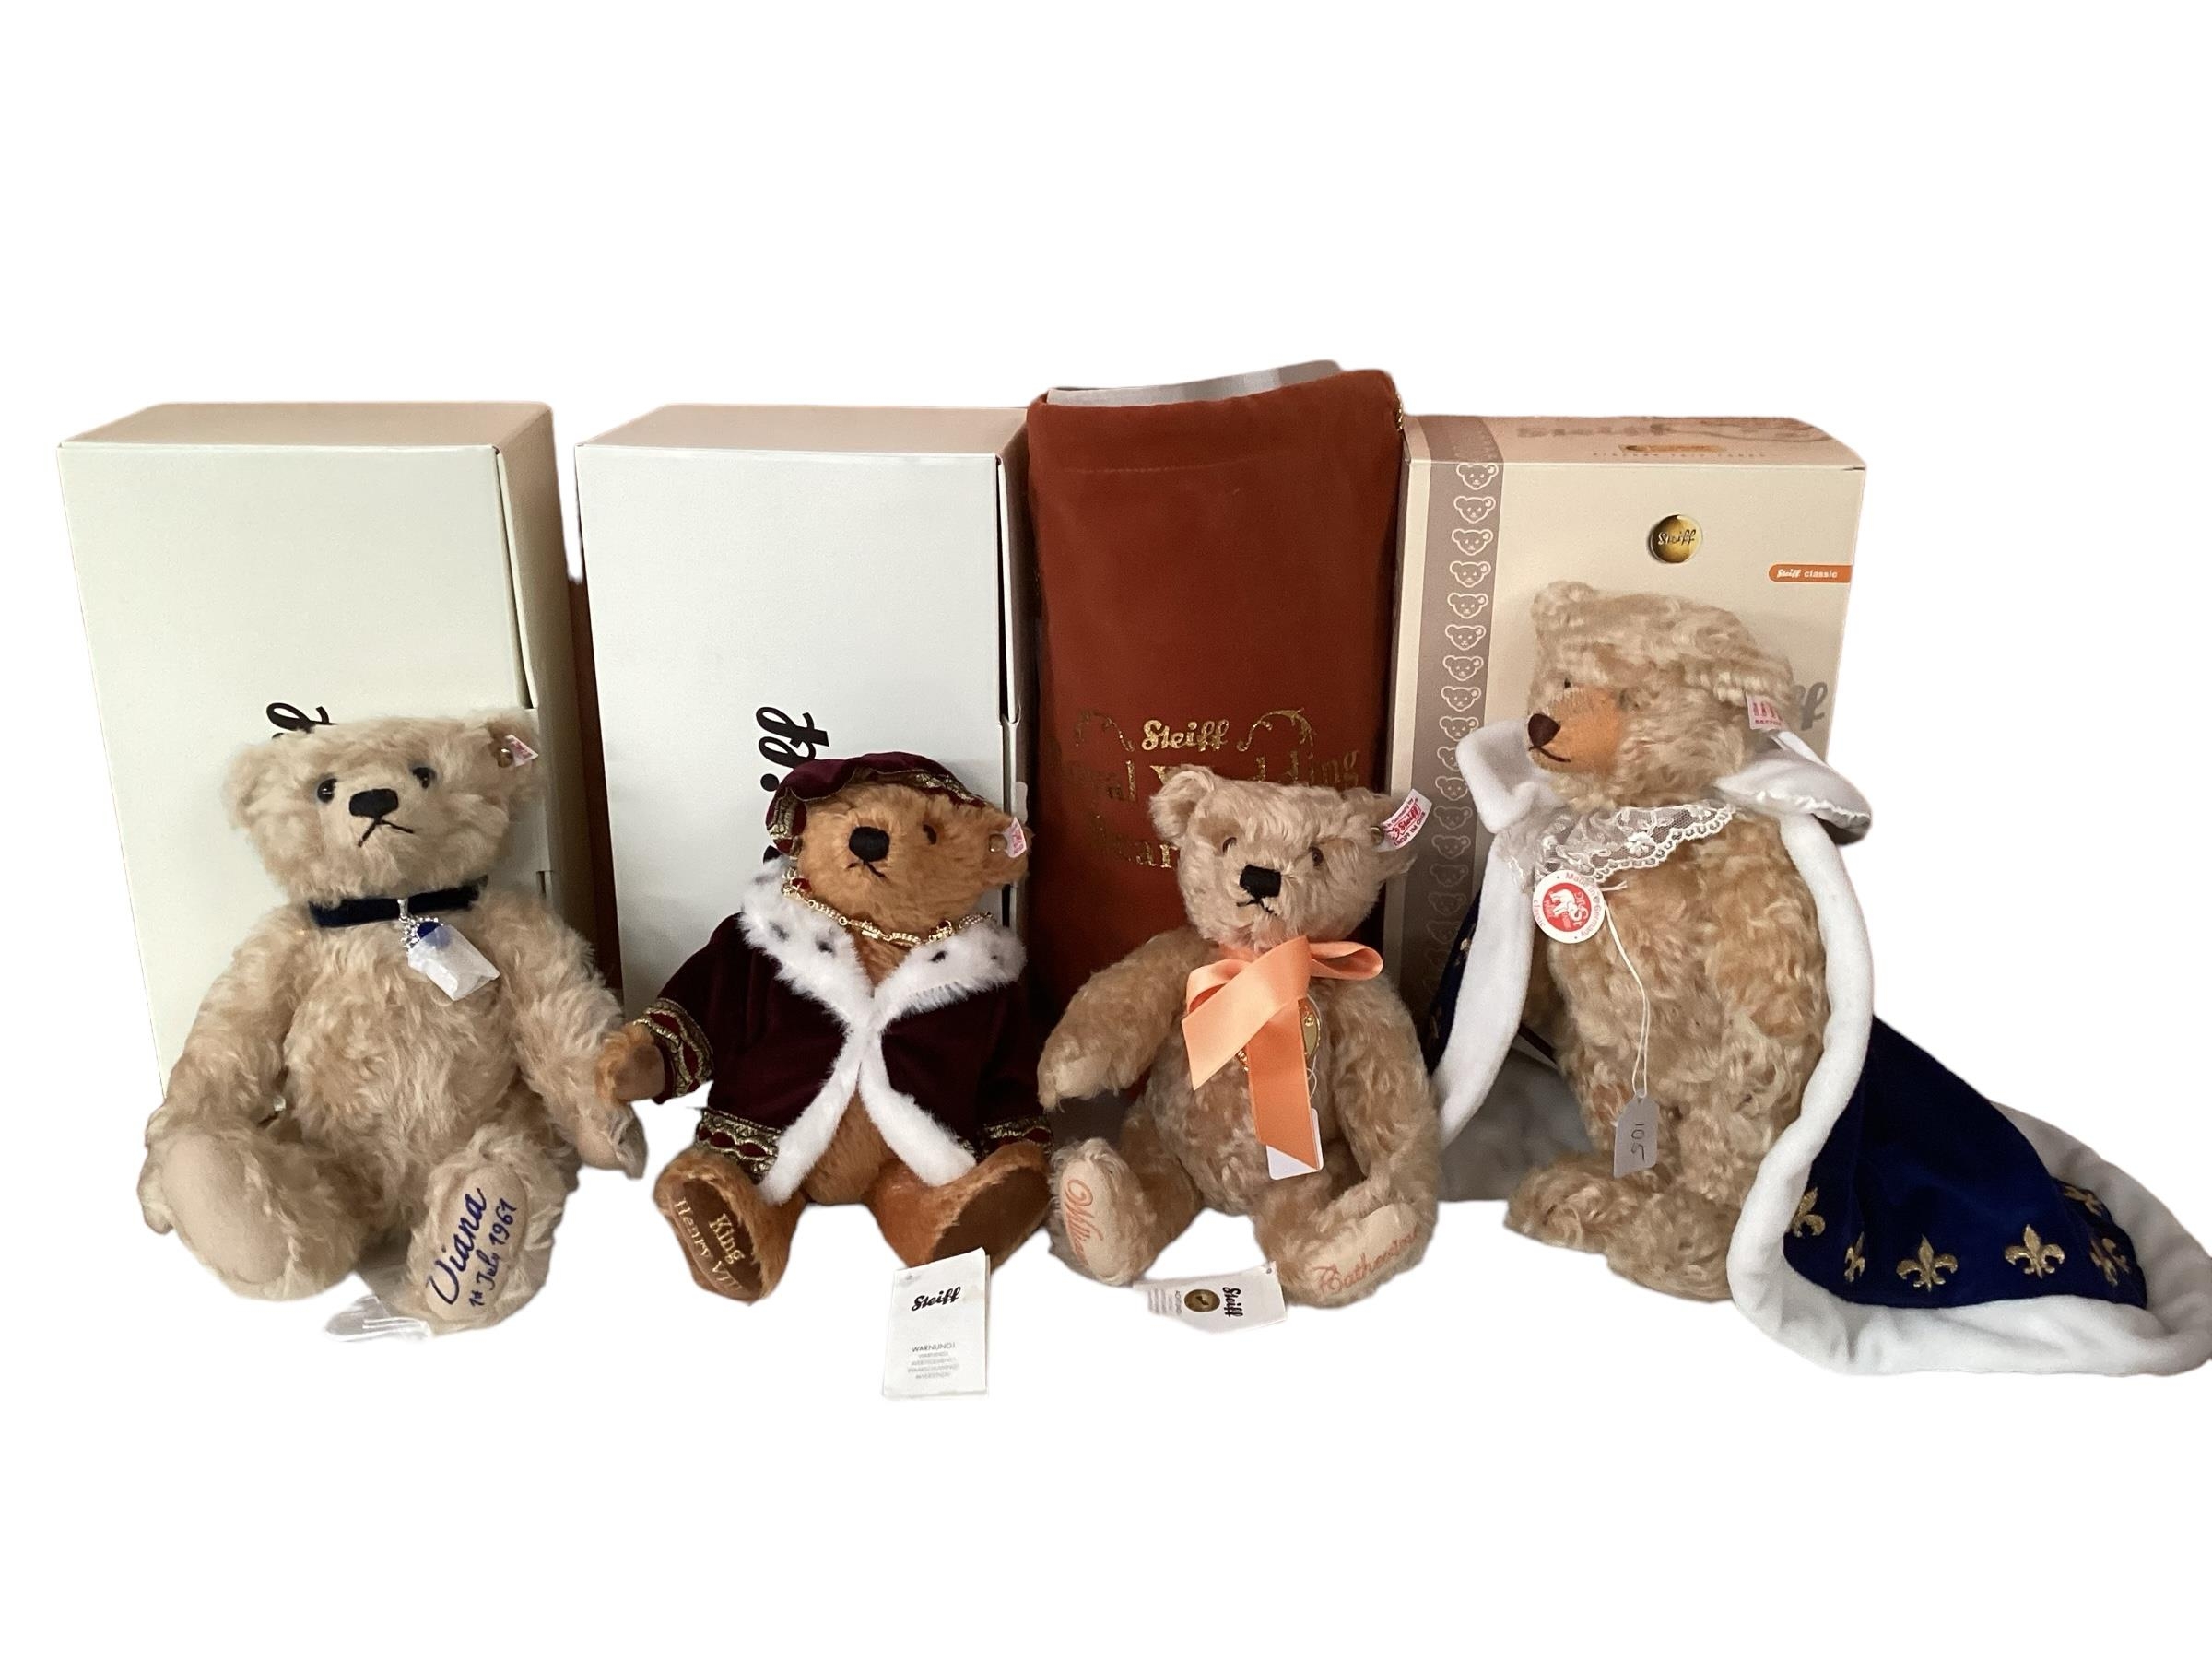 Four Steiff Bears with a Royal theme, all boxed, all limited, all certificates, in condition as new,